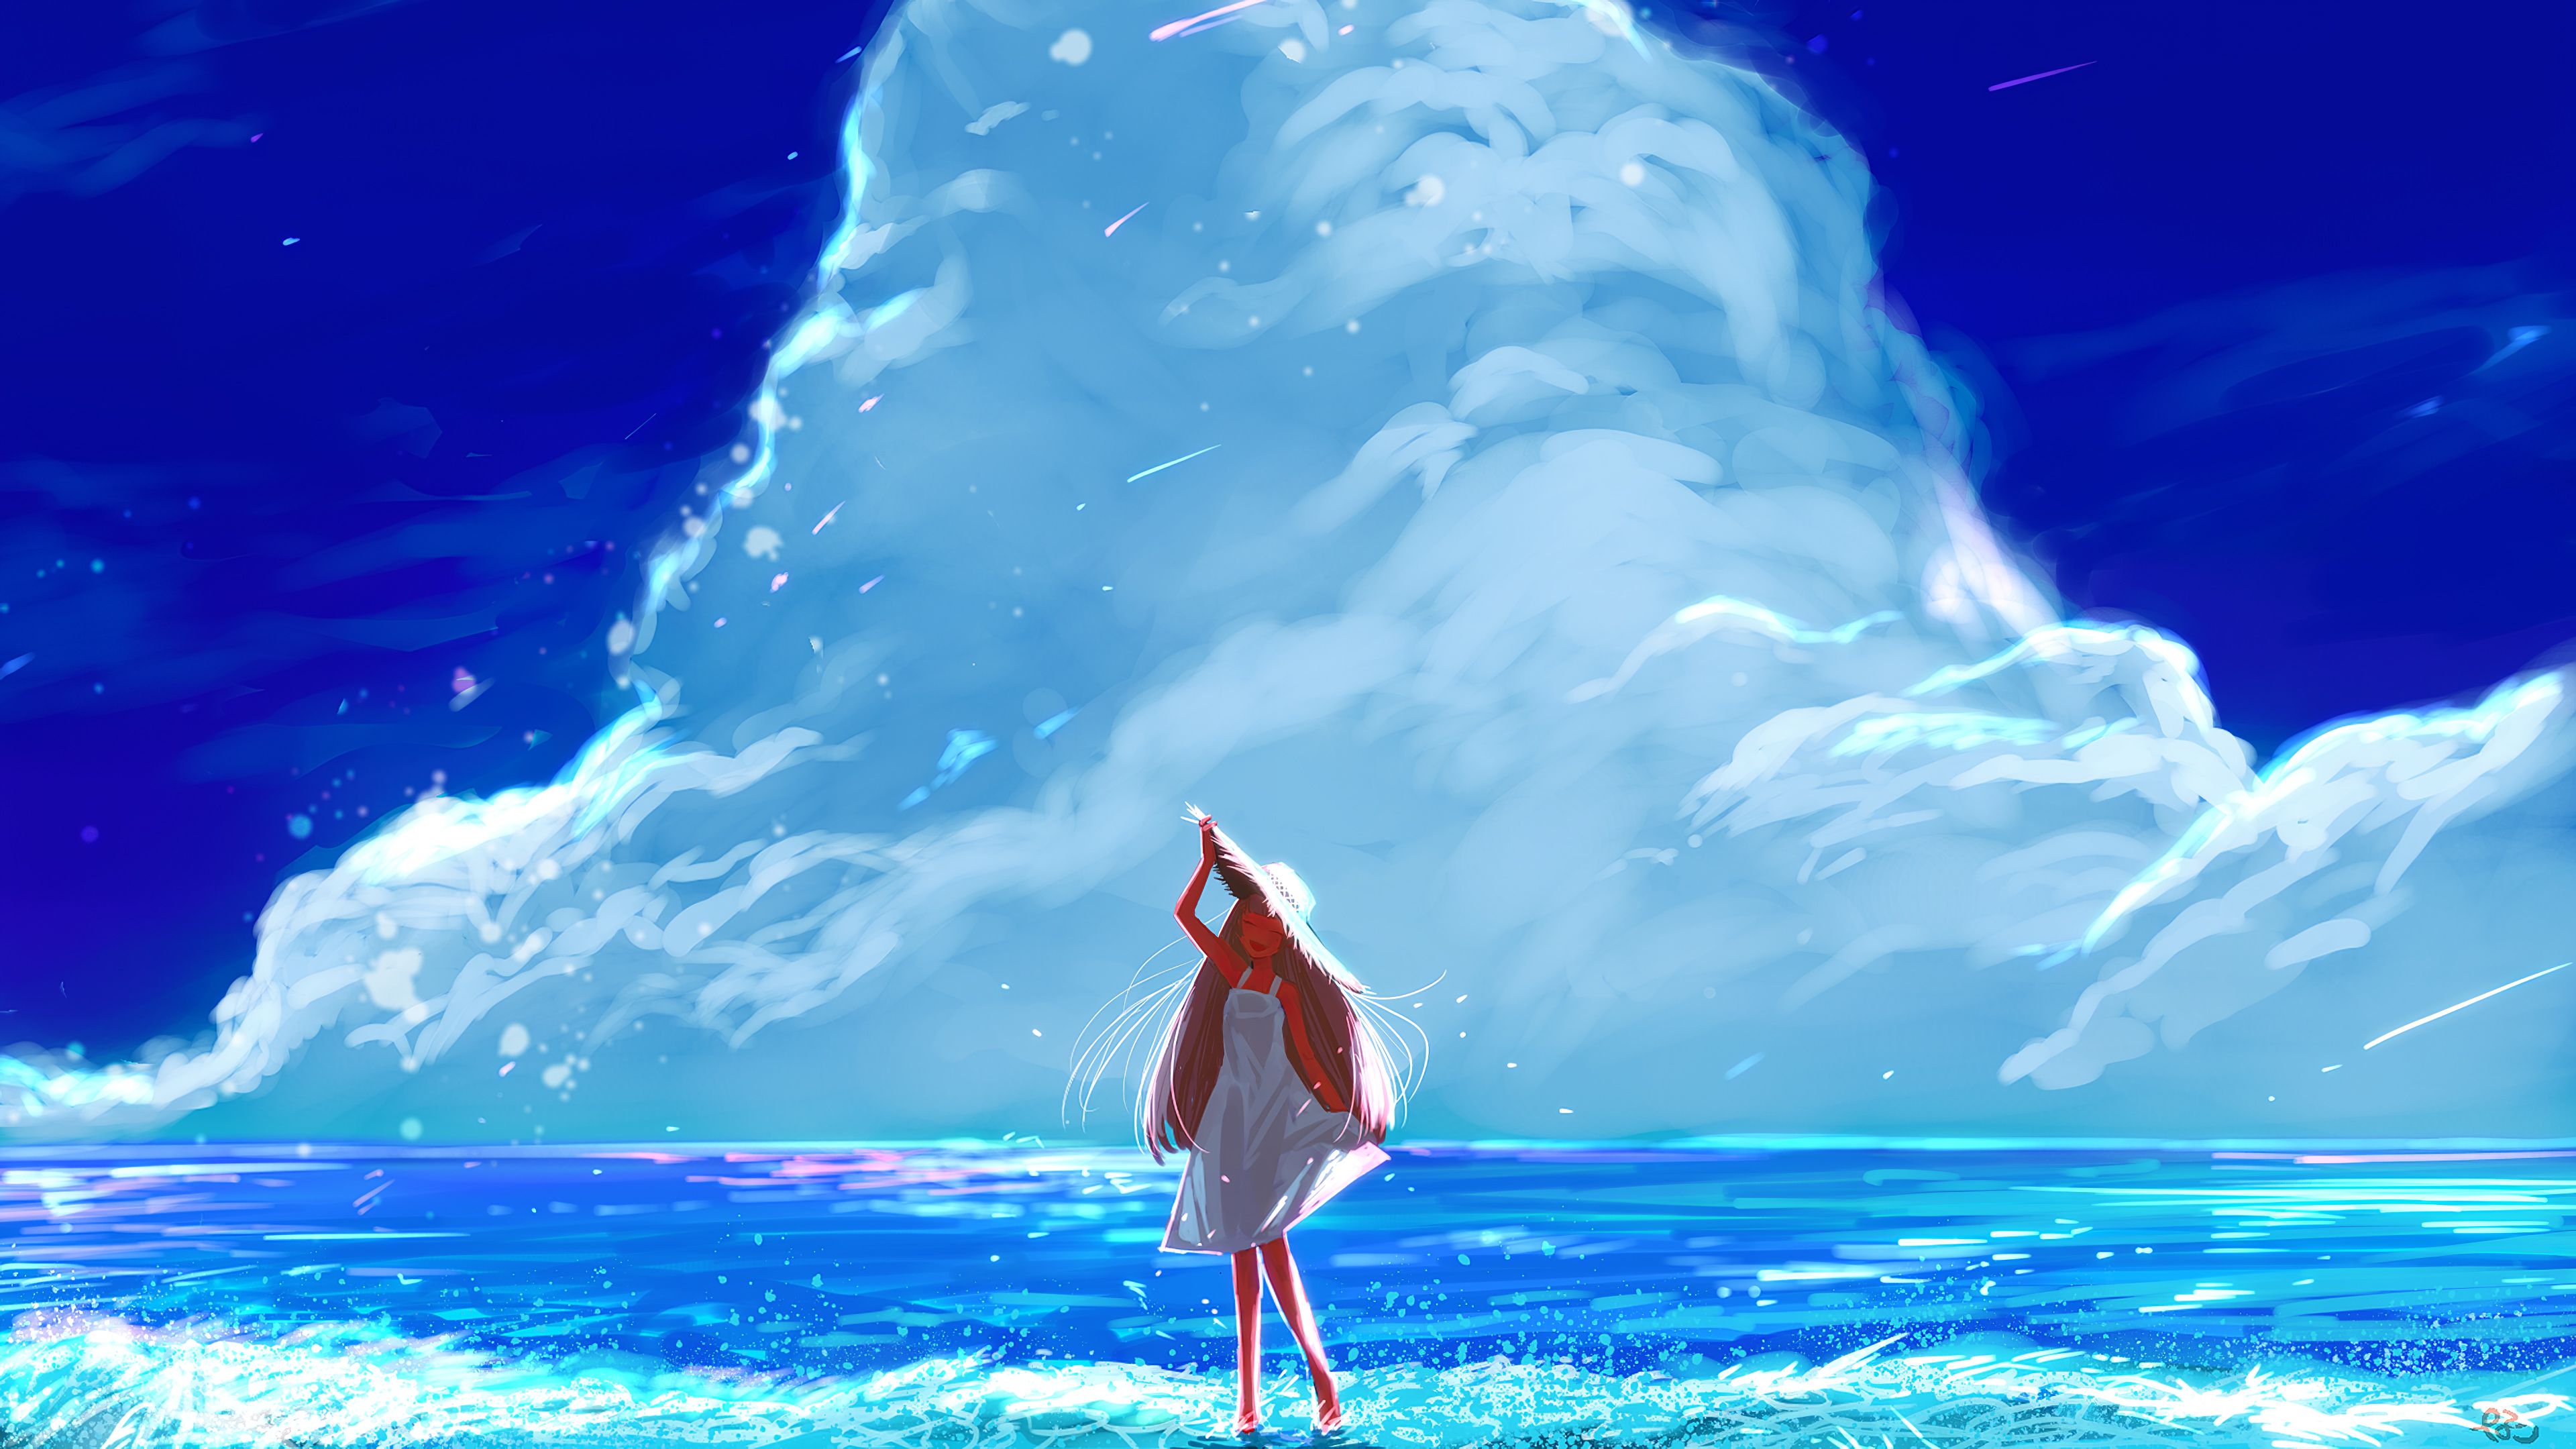 In front of the ocean - Anime style Background by TamagochiKun on DeviantArt